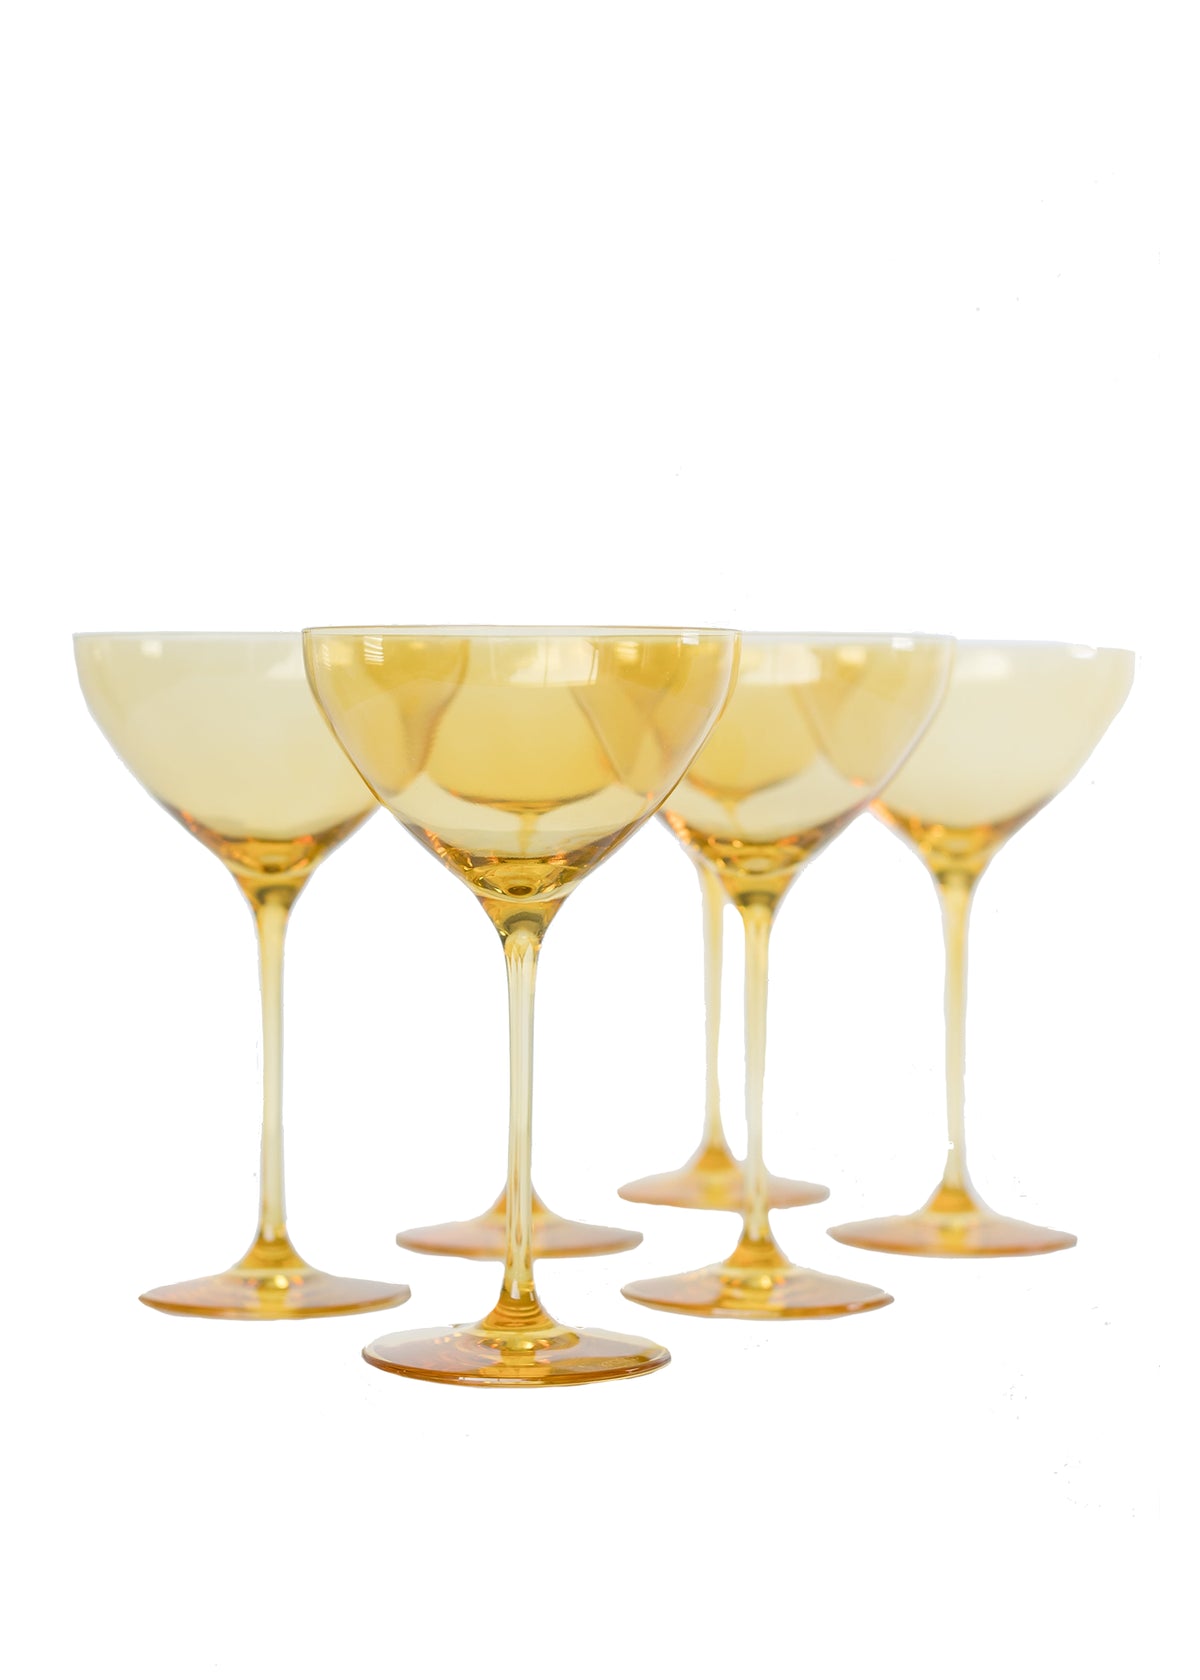 Estelle Colored Martini Glass in Yellow, Set of 6